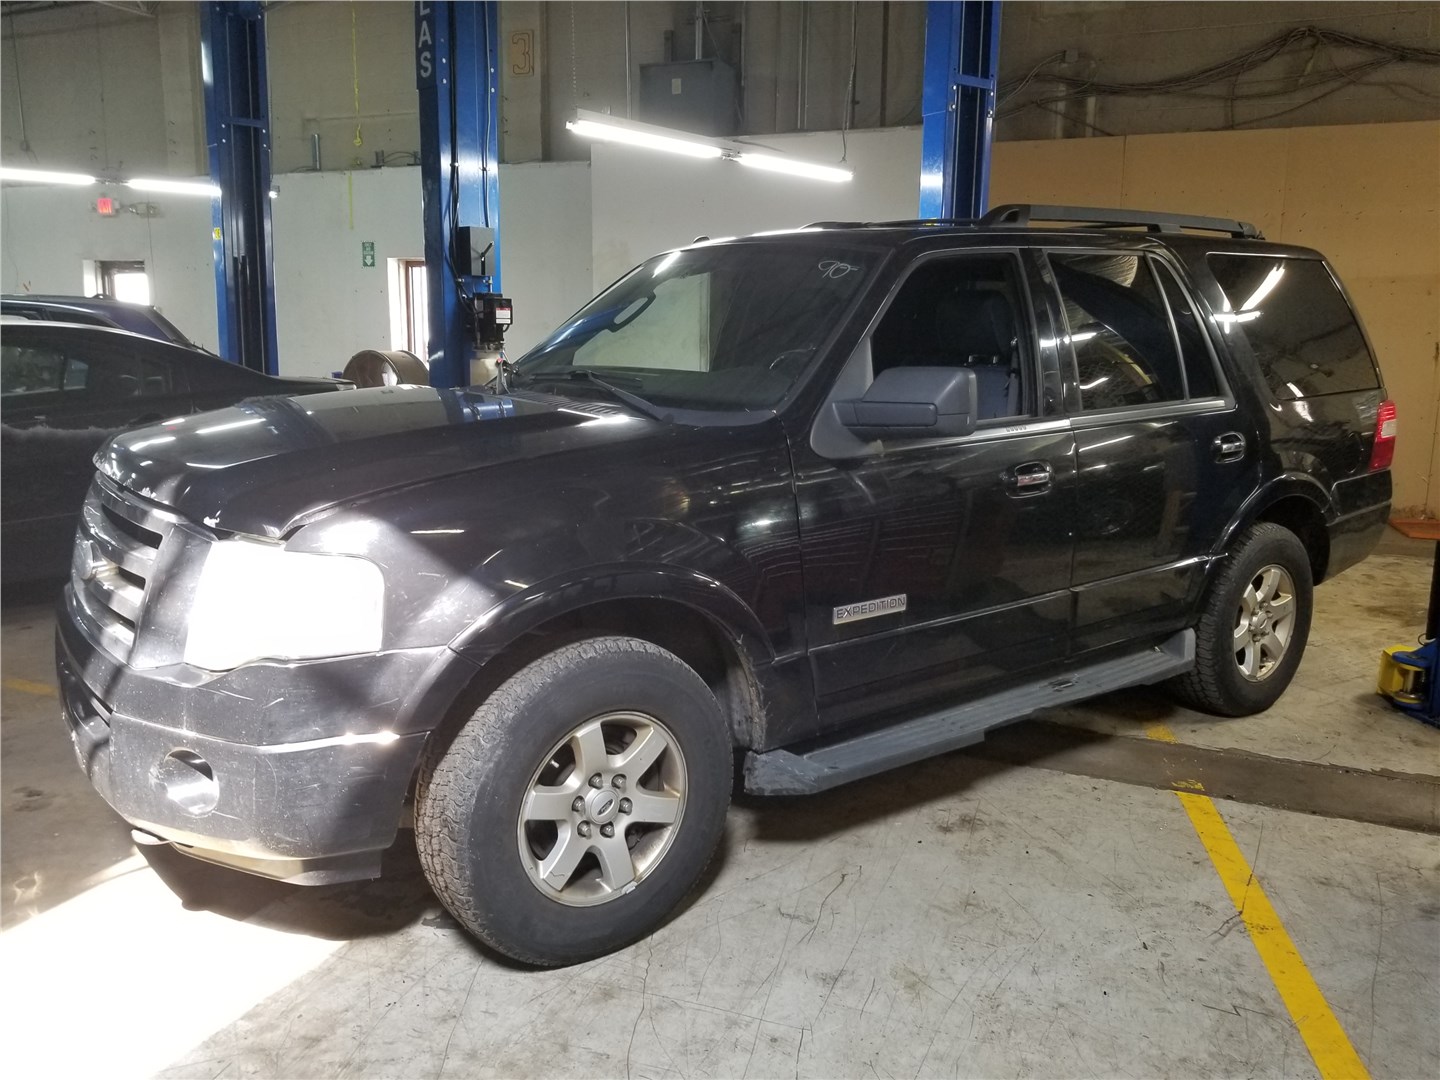 7L1Z5500AA Рычаг подвески Ford Expedition 2006-2014 2008